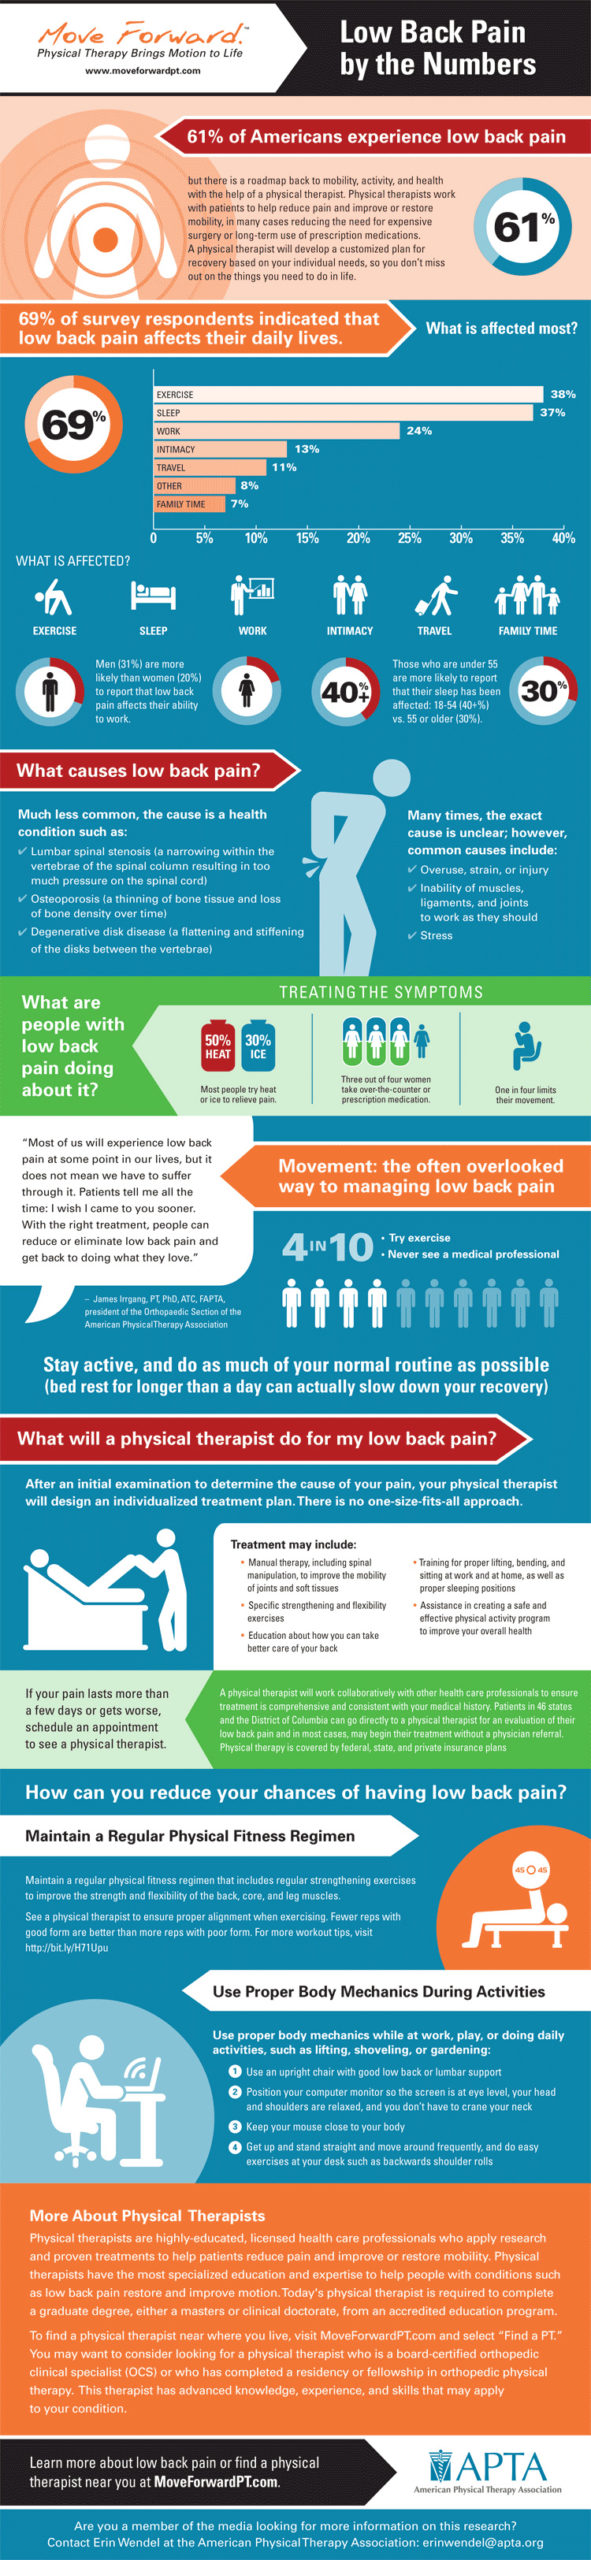 Low Back Pain Infographic